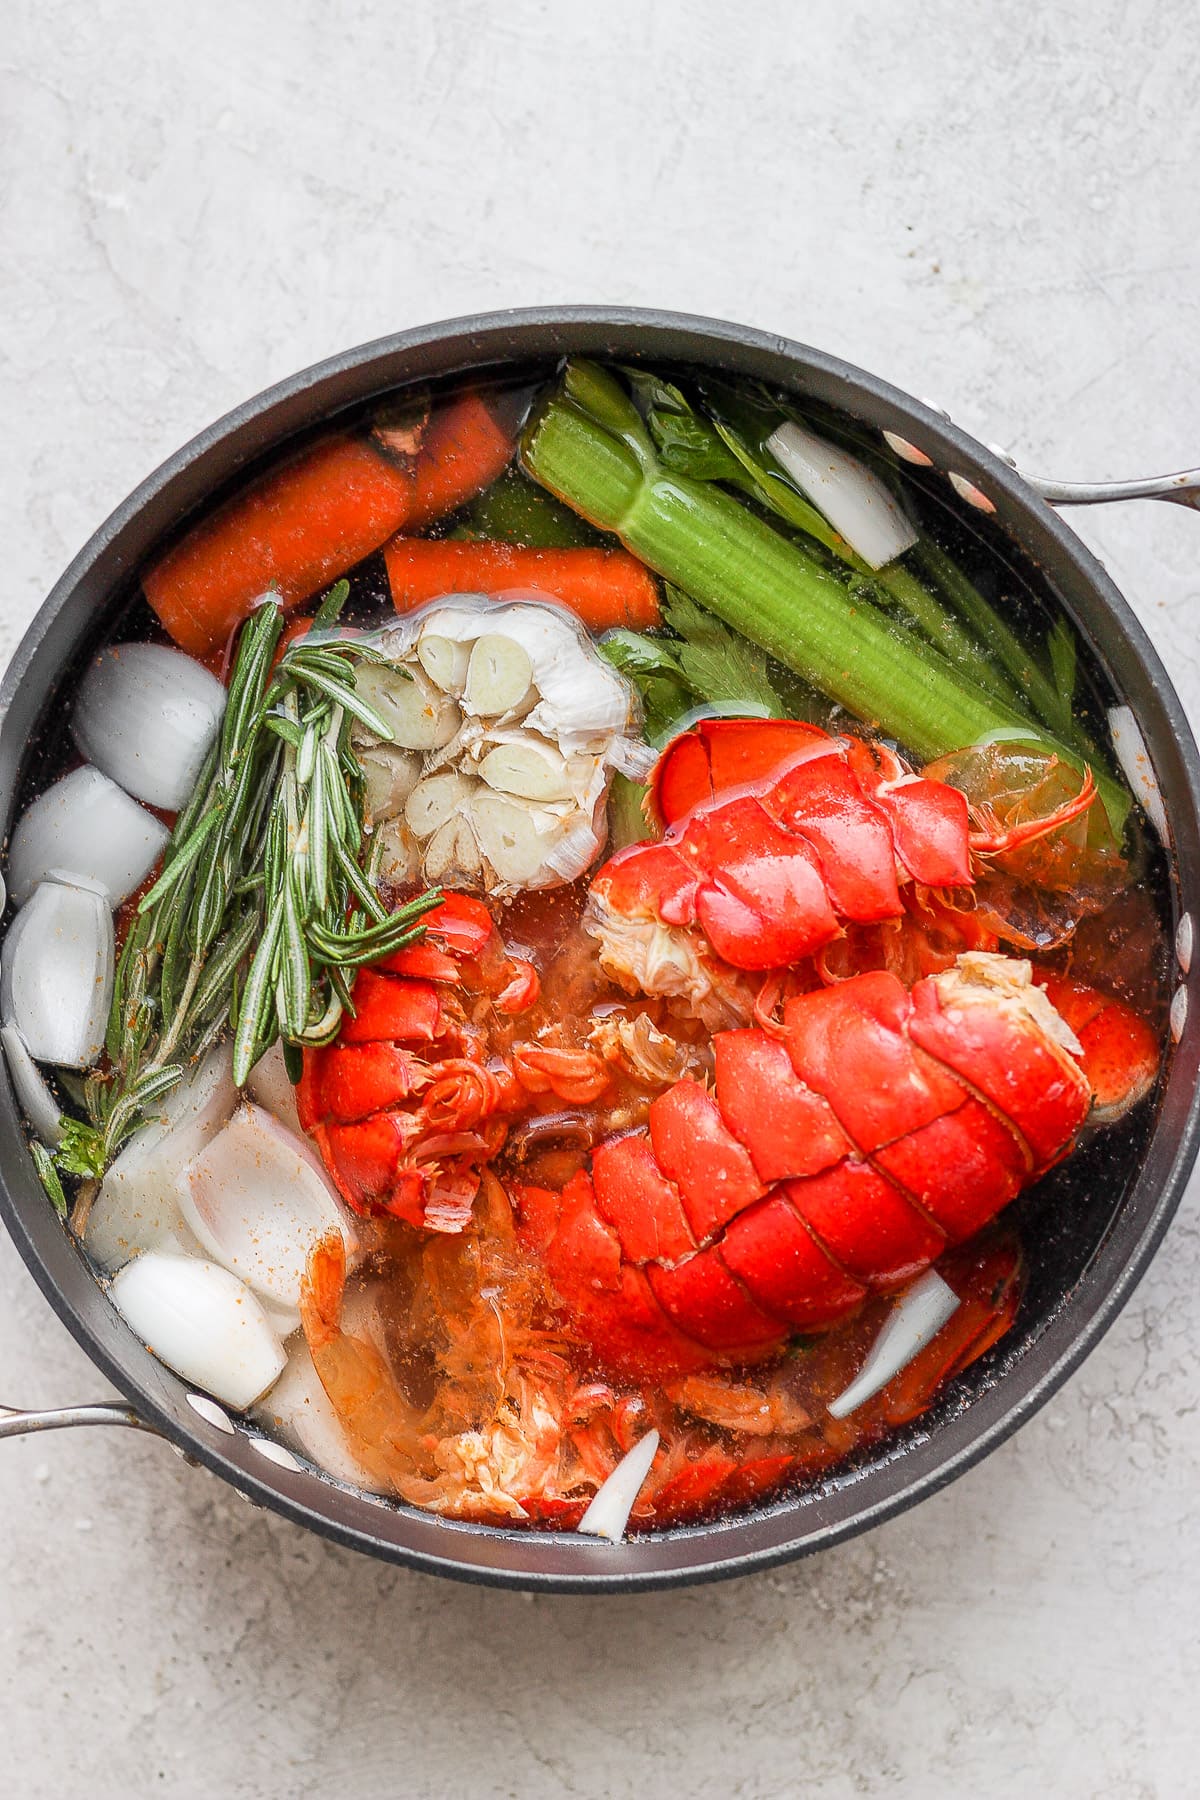 Dutch oven with seafood stock ingredients plus water.